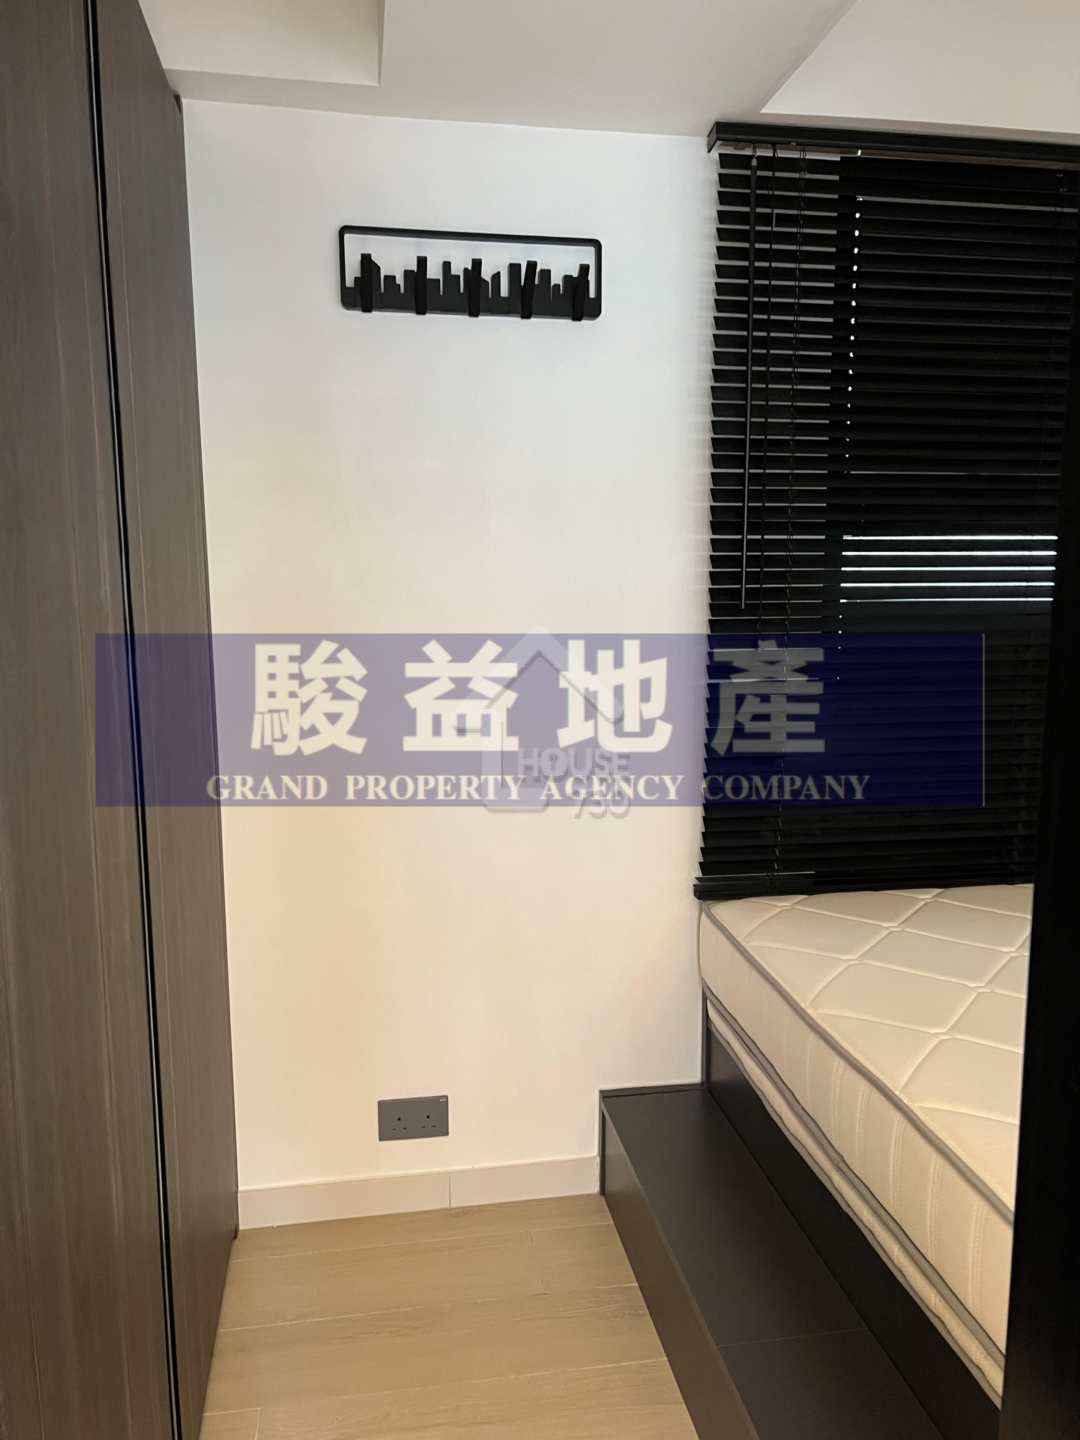 Cheung Sha Wan WO FUNG BUILDING Lower Floor Master Room House730-6209257